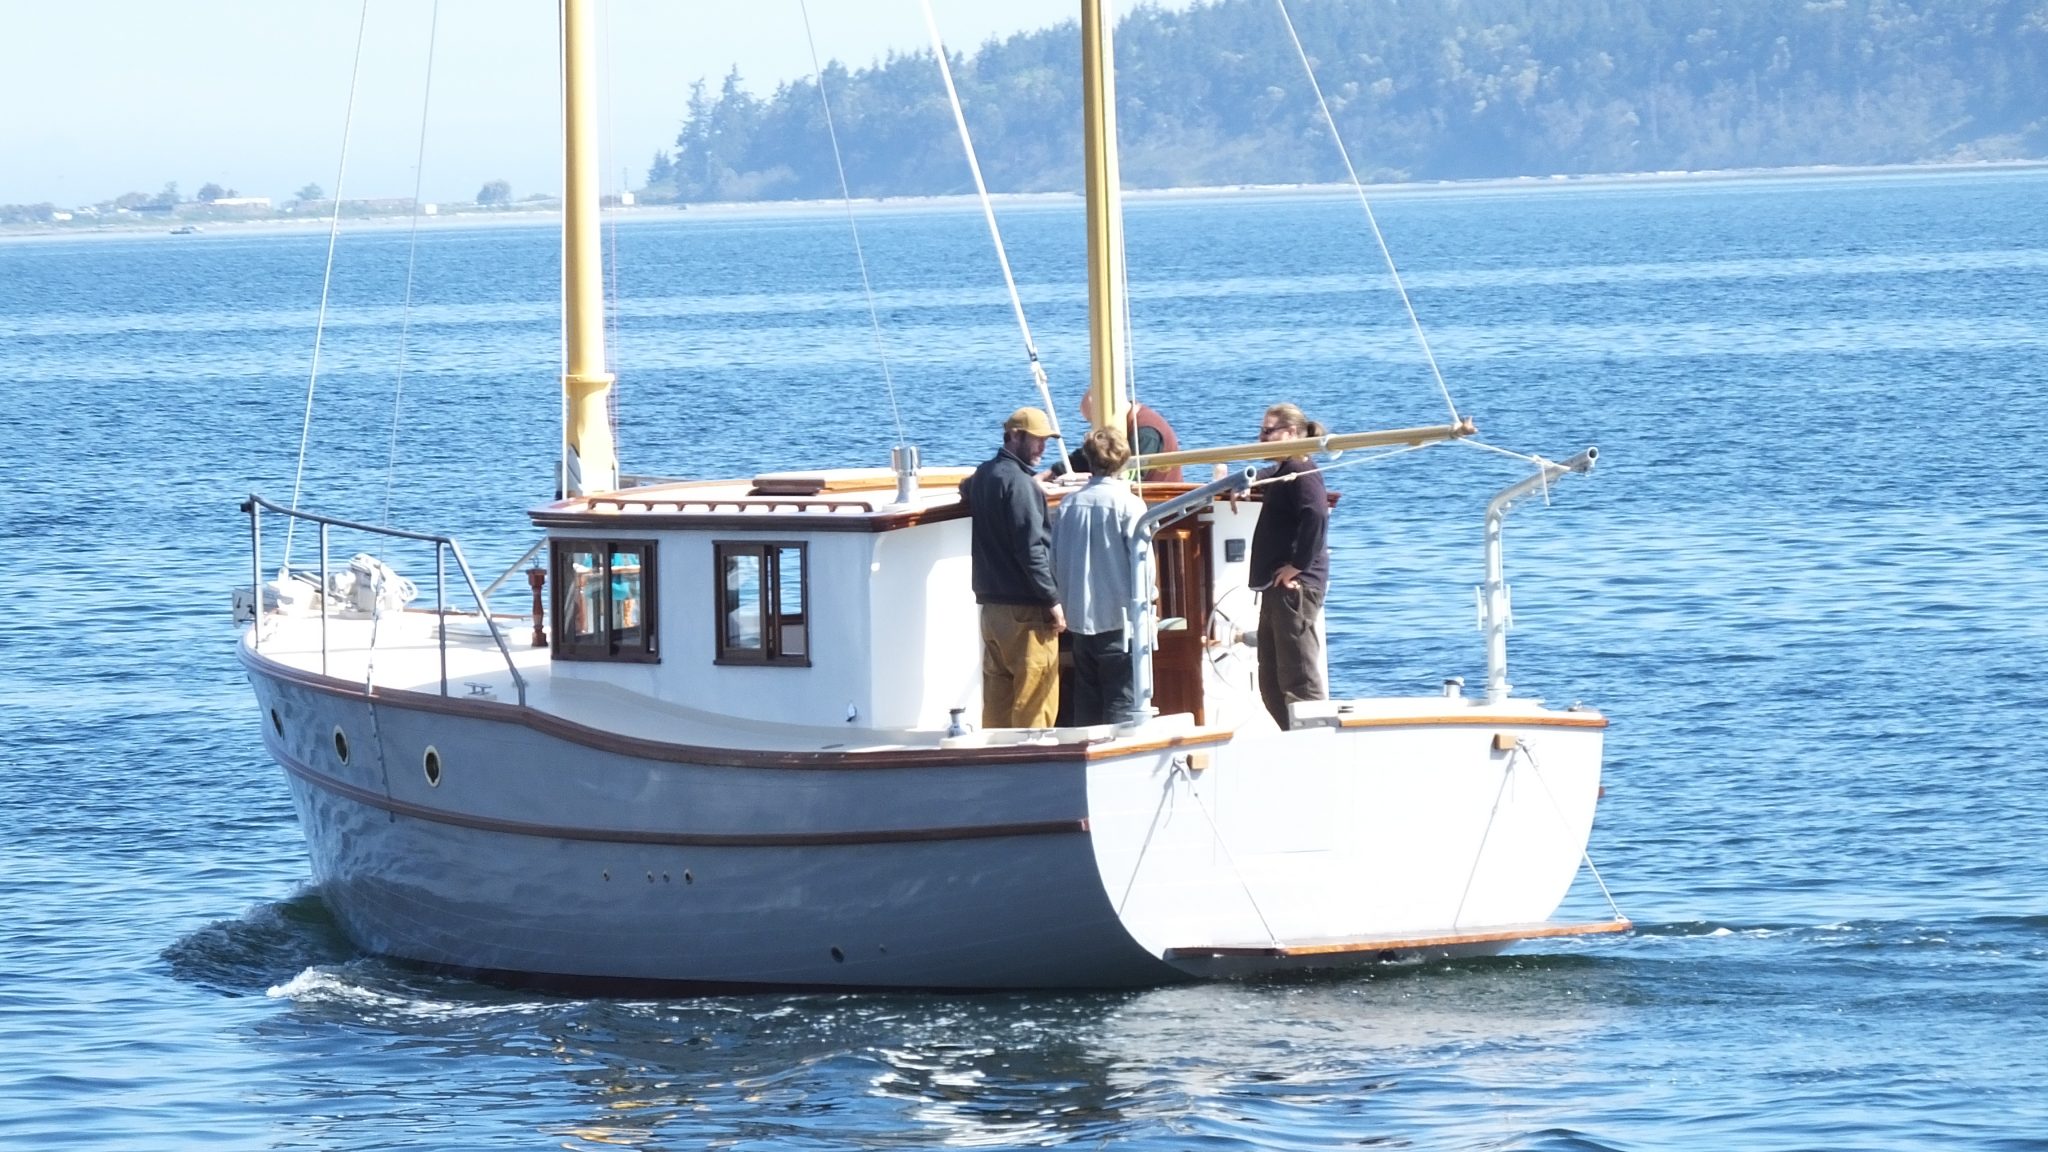 nwswb at the port townsend wooden boat festival